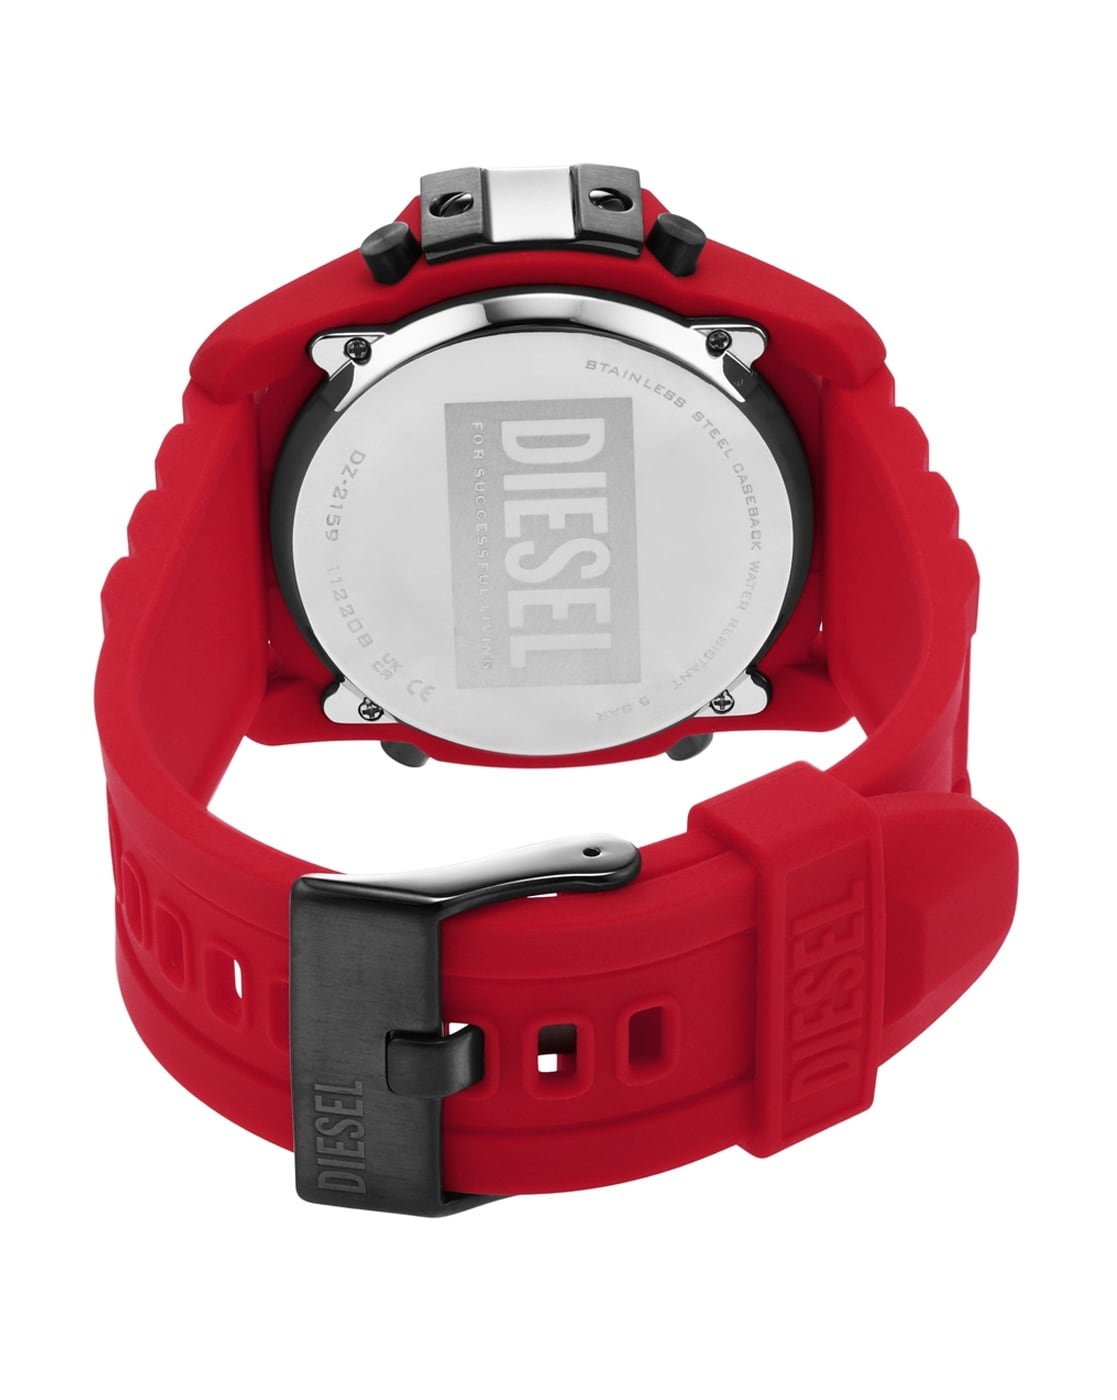 Diesel Brand New DZ1980 Men's Double Up Red Silicon 3 hand Watch Boxed NWT  $125 | eBay